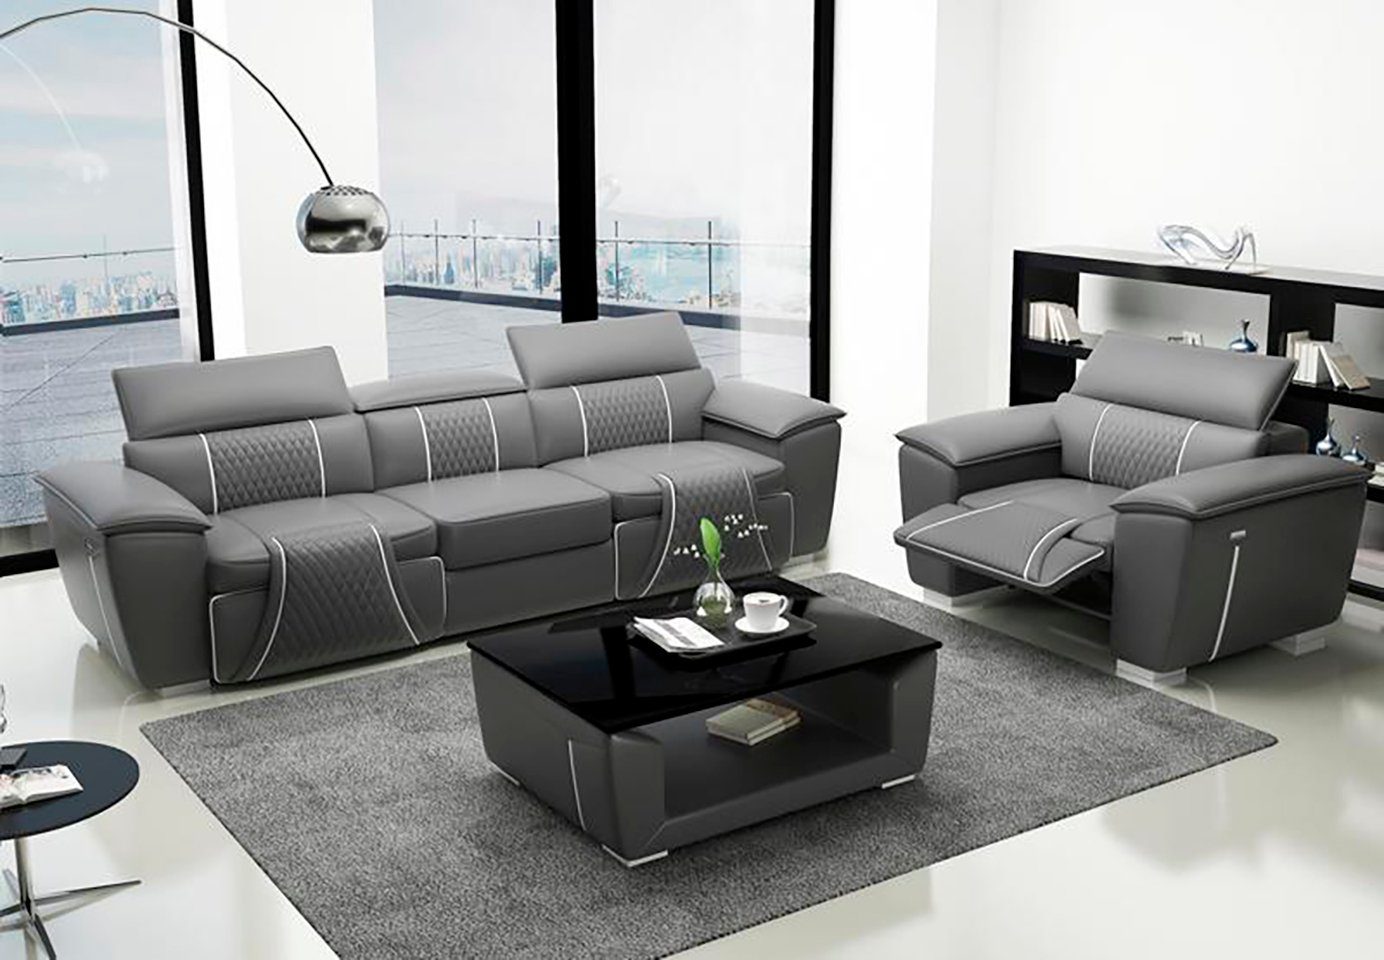 Sofa Europe Made 3+2+2 JVmoebel Sitzer, Multifunktions Sofa Couch Polster in Sofagarnitur Relax